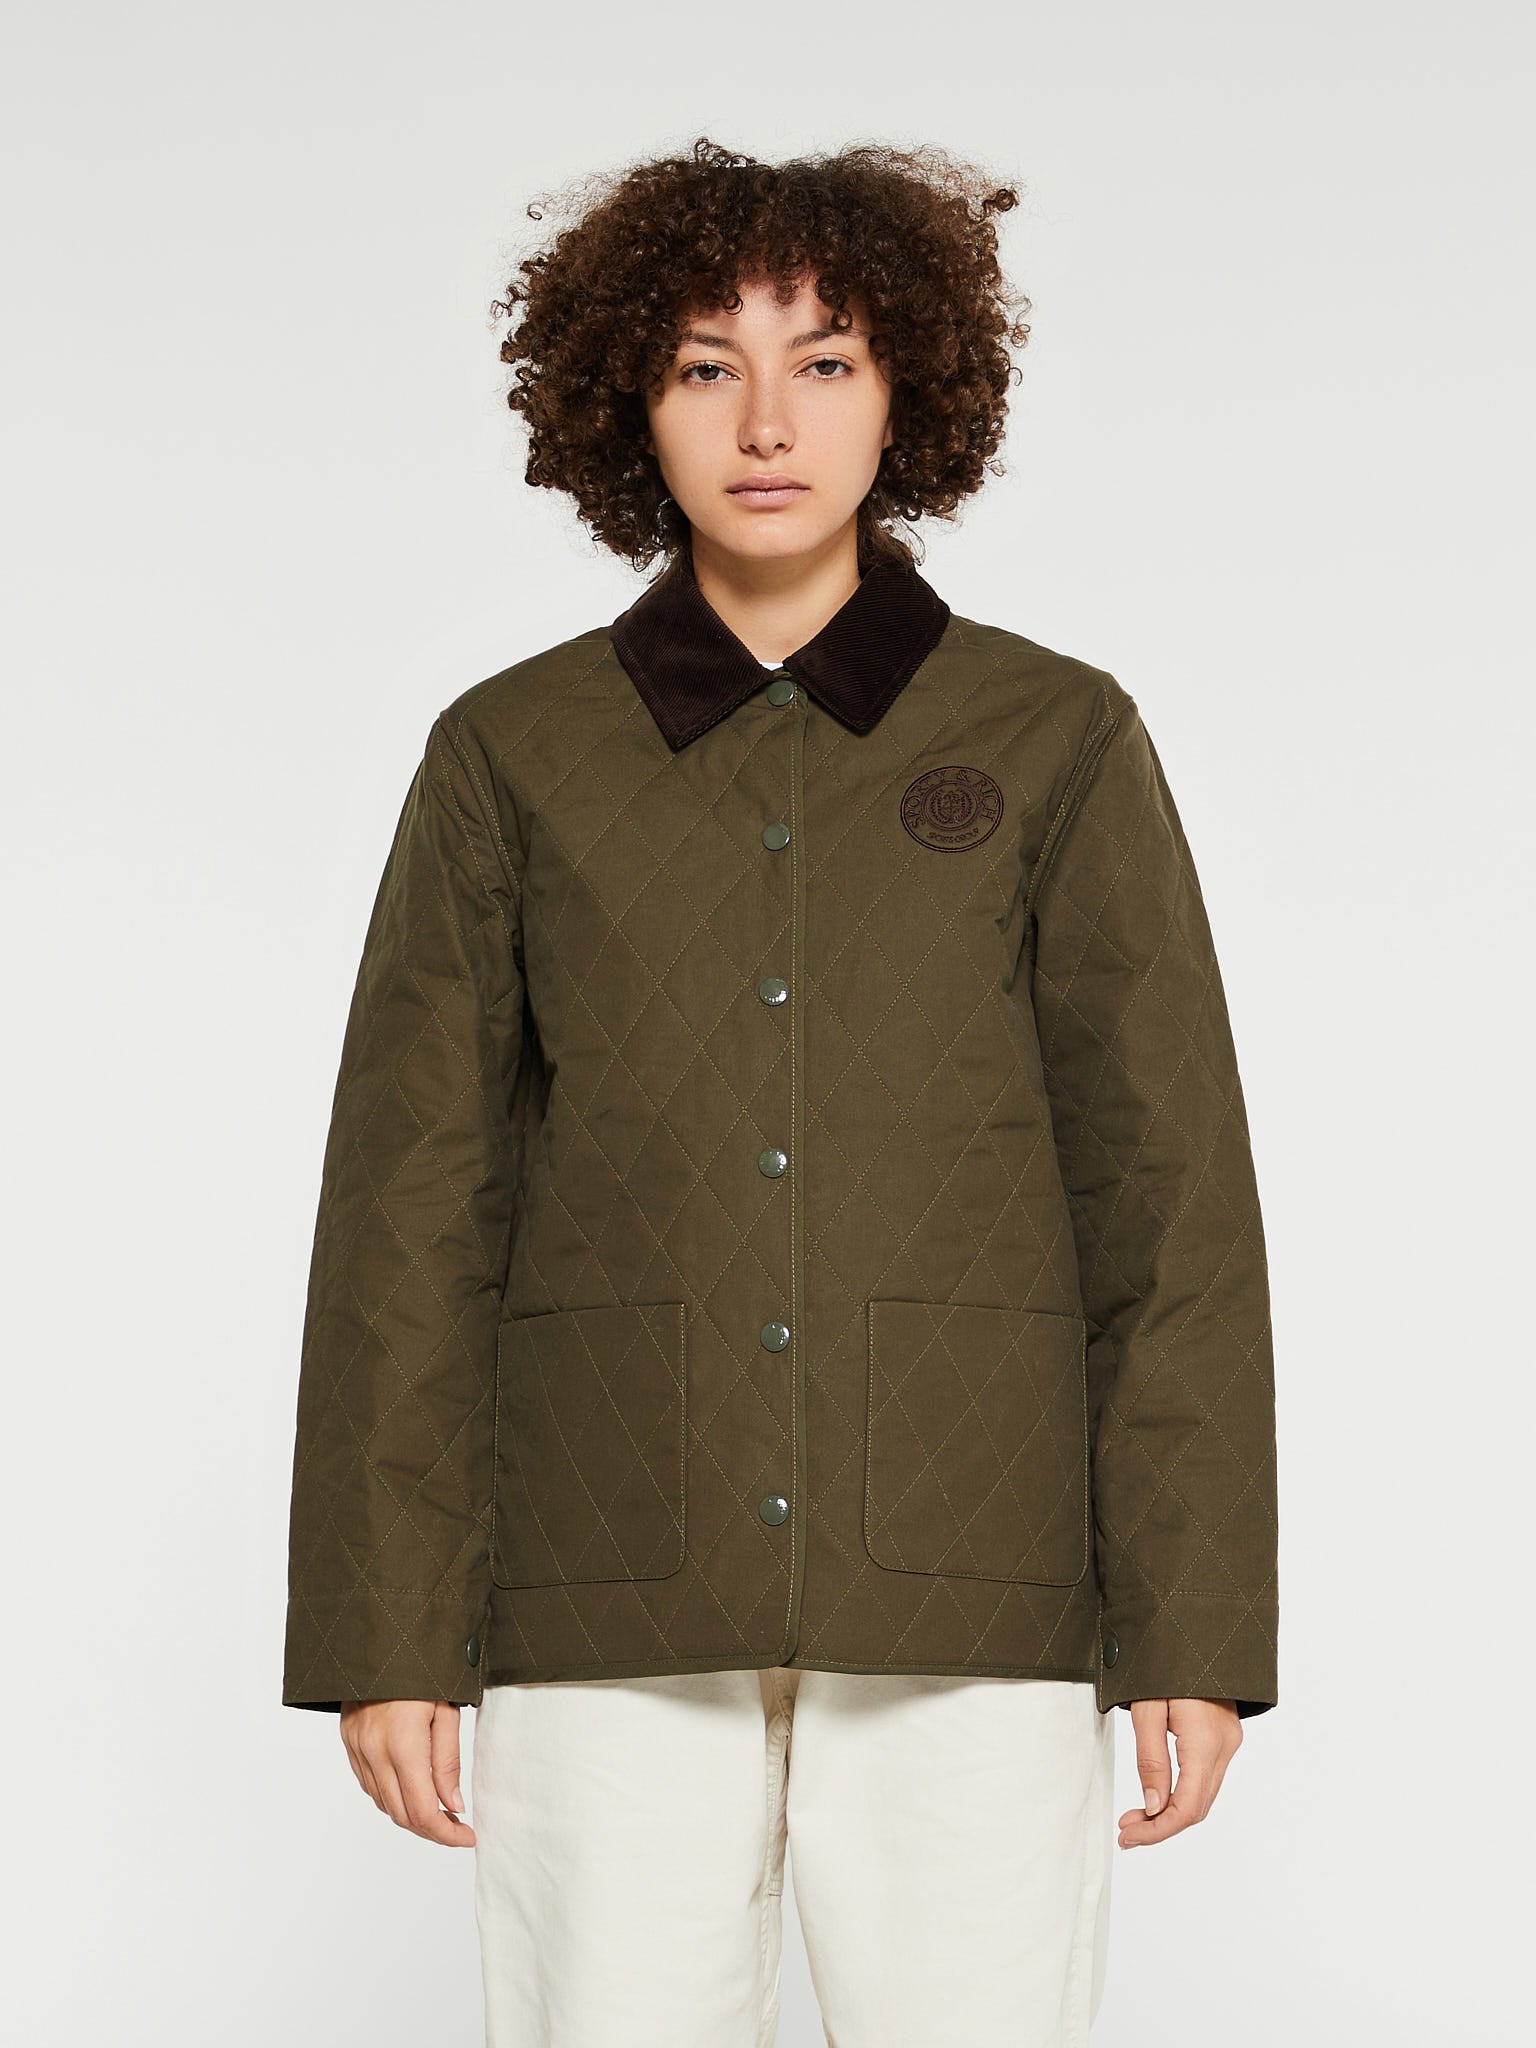 Sporty & Rich - Connecticut Crest Quilted Jacket in Kaki